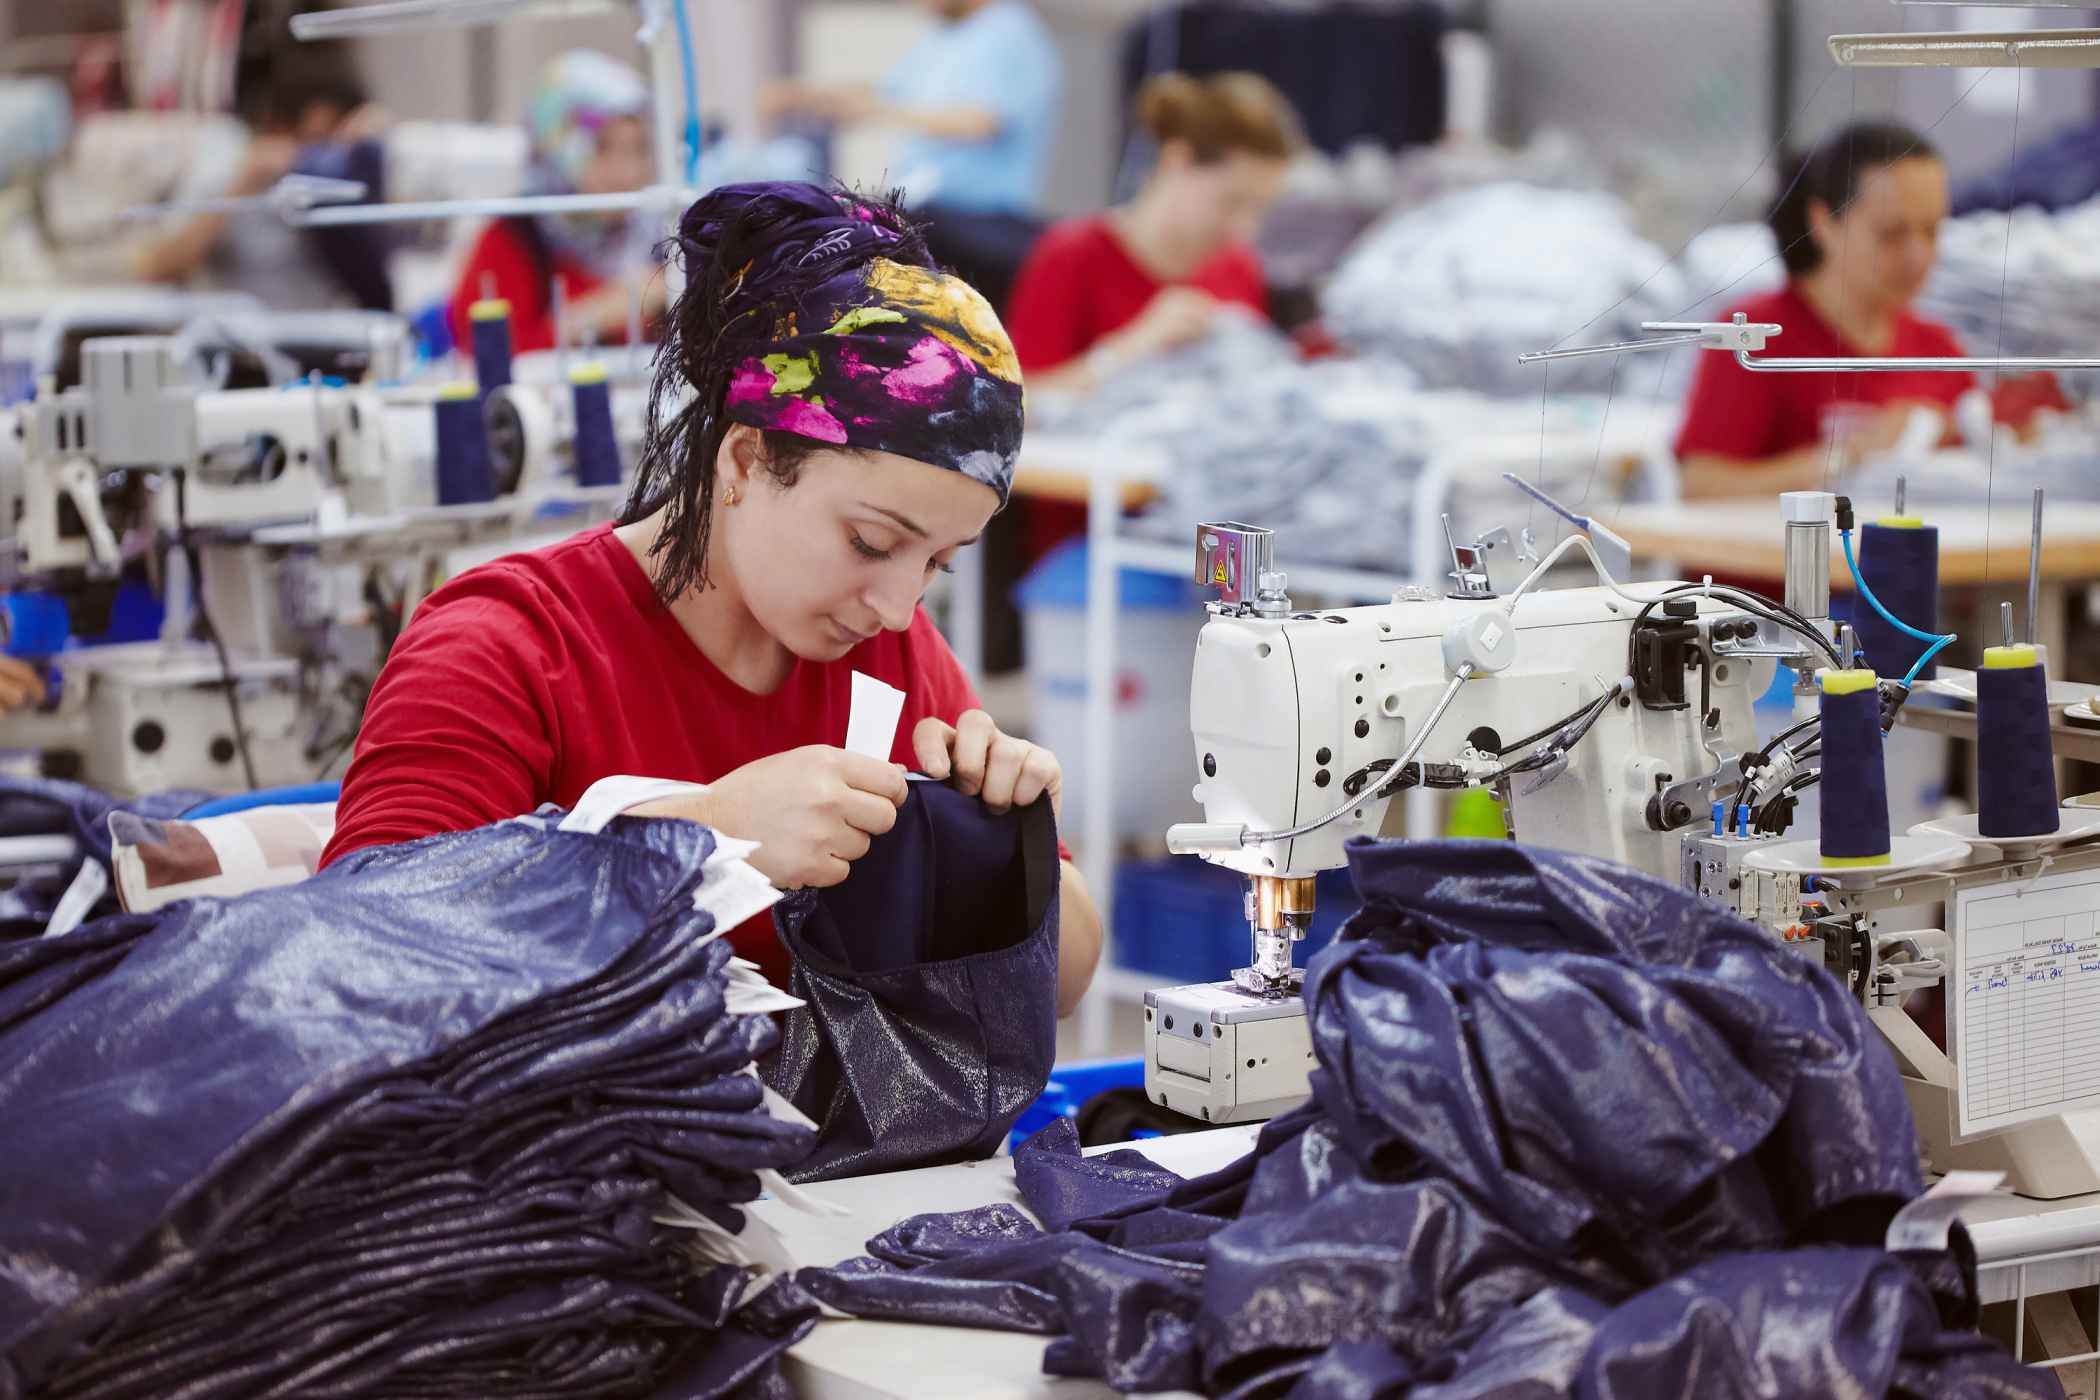 Wholesale clothing: learn how to reduce costs in production